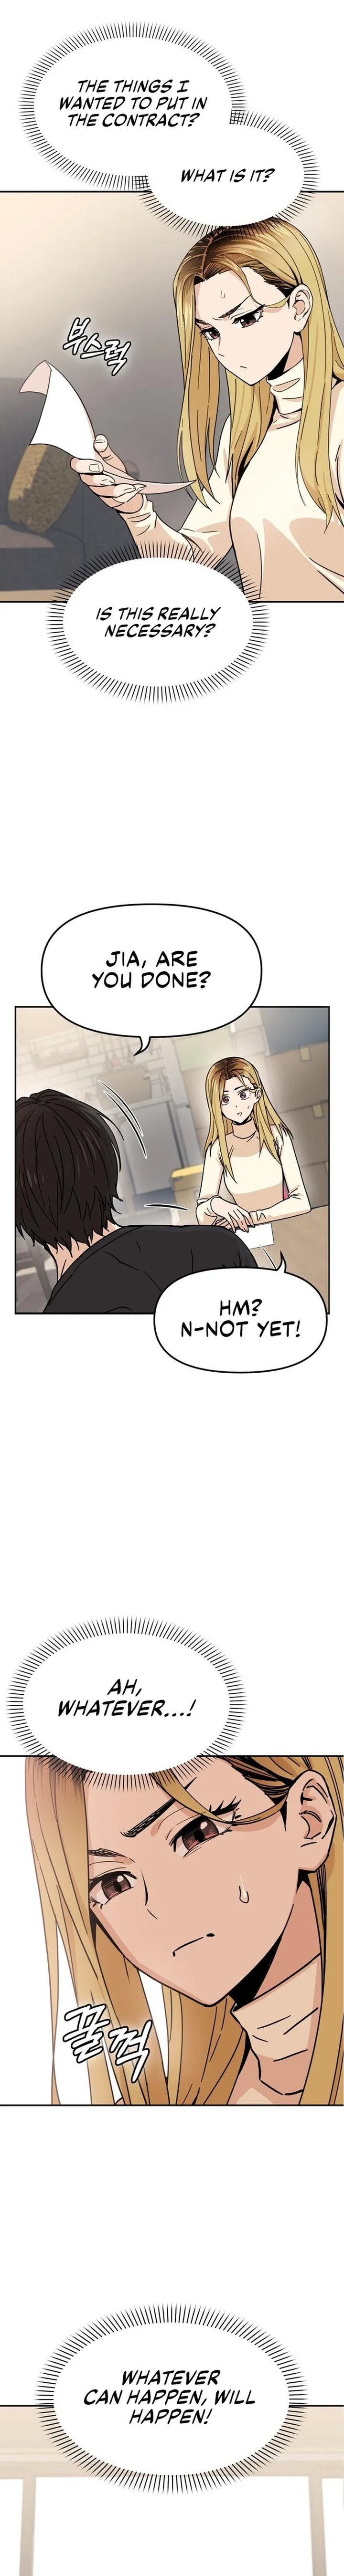 Match Made In Heaven By Chance Chapter 4 Page 7